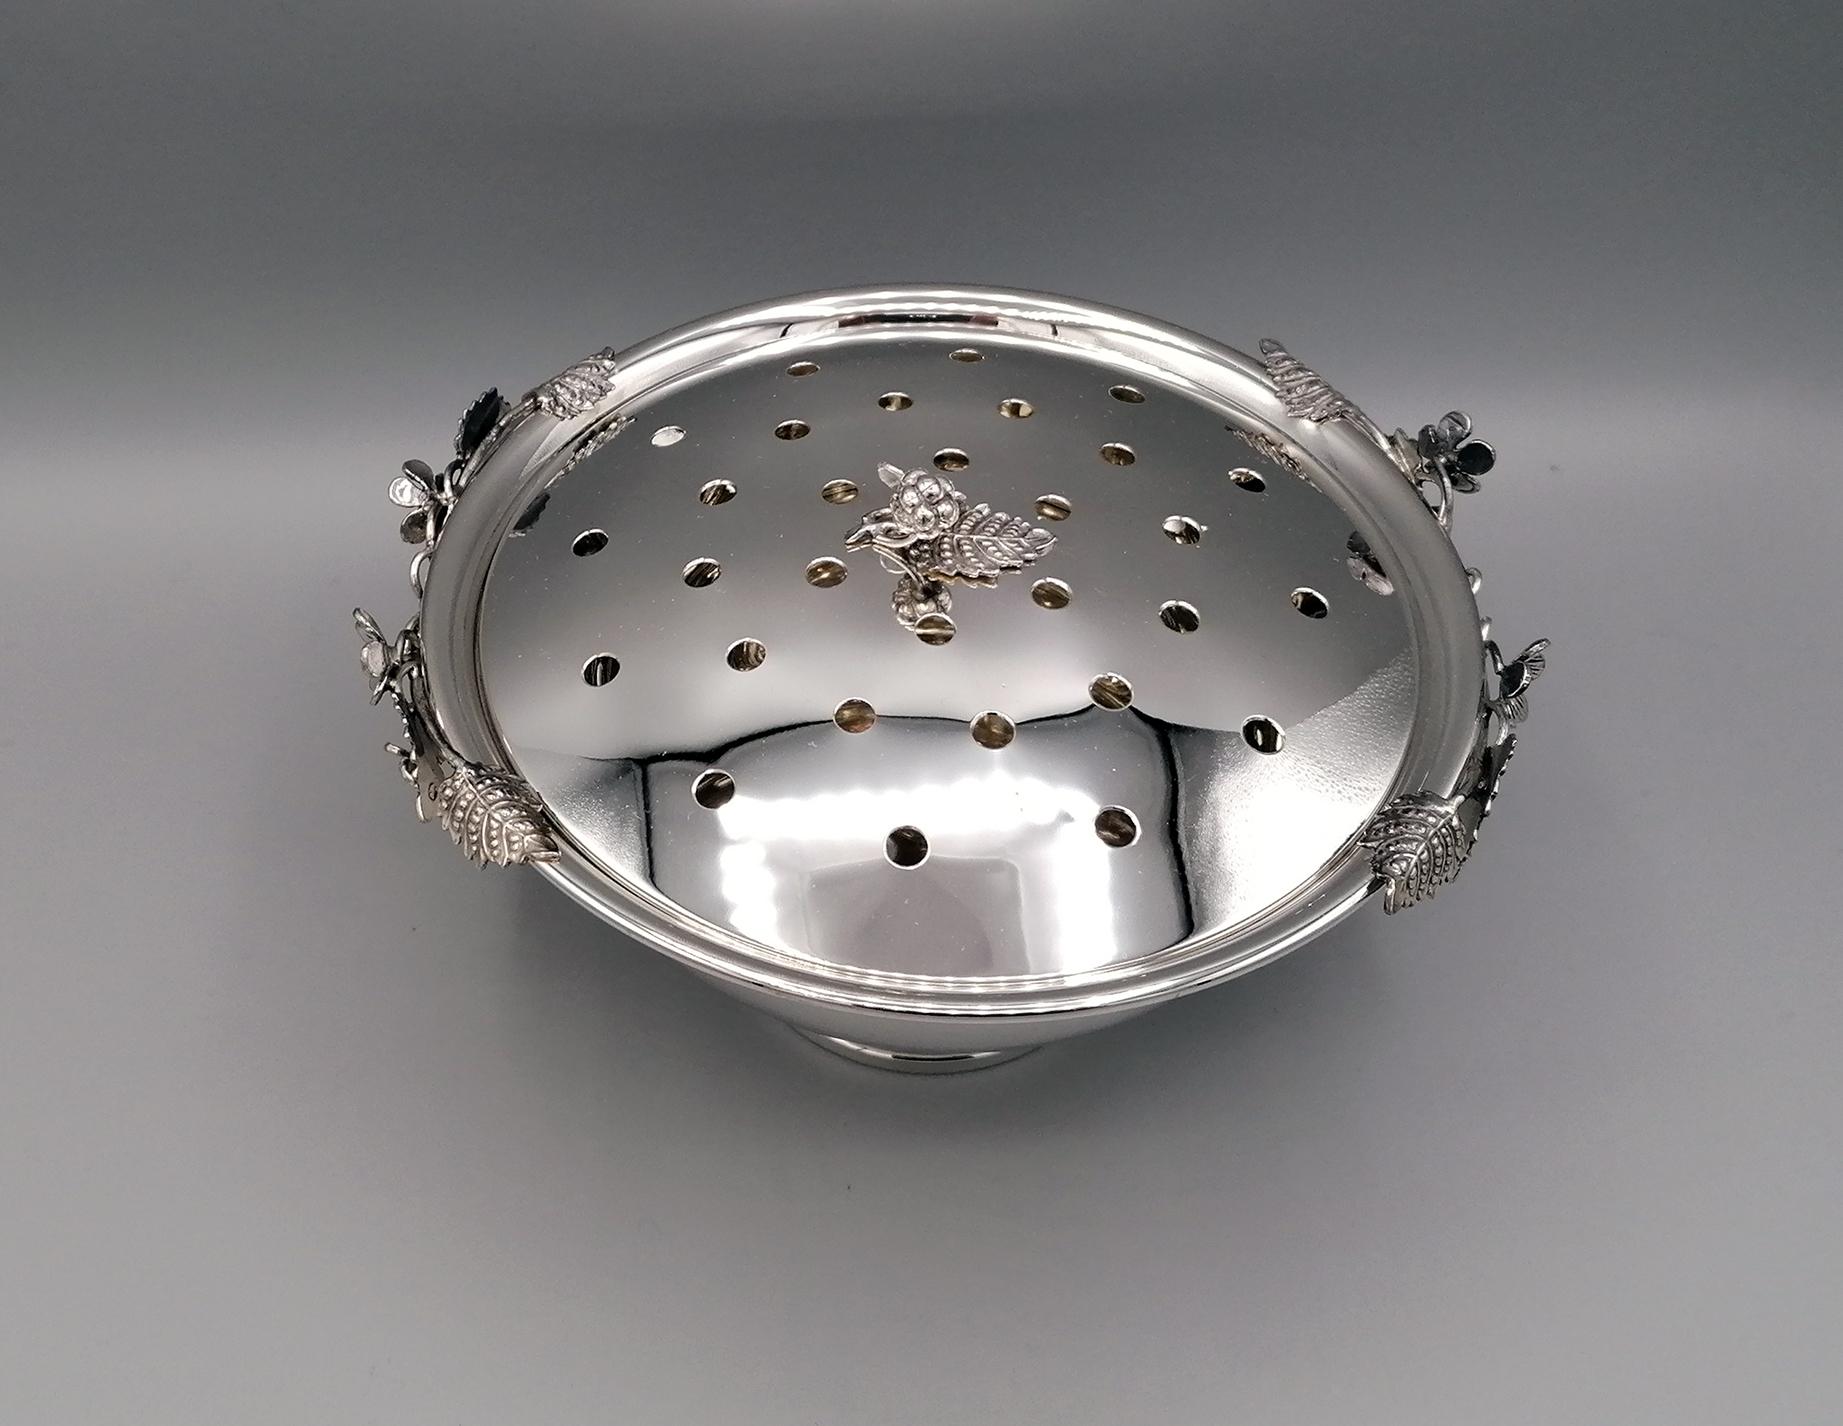 Solid 925 sterling silver smooth round shape flower box with base.
The perforated lid has a knob in fusion with blackberry and leaf,
On the edge of the bowl it is decorated with blackberries and leaves made in silver casting.
The object being